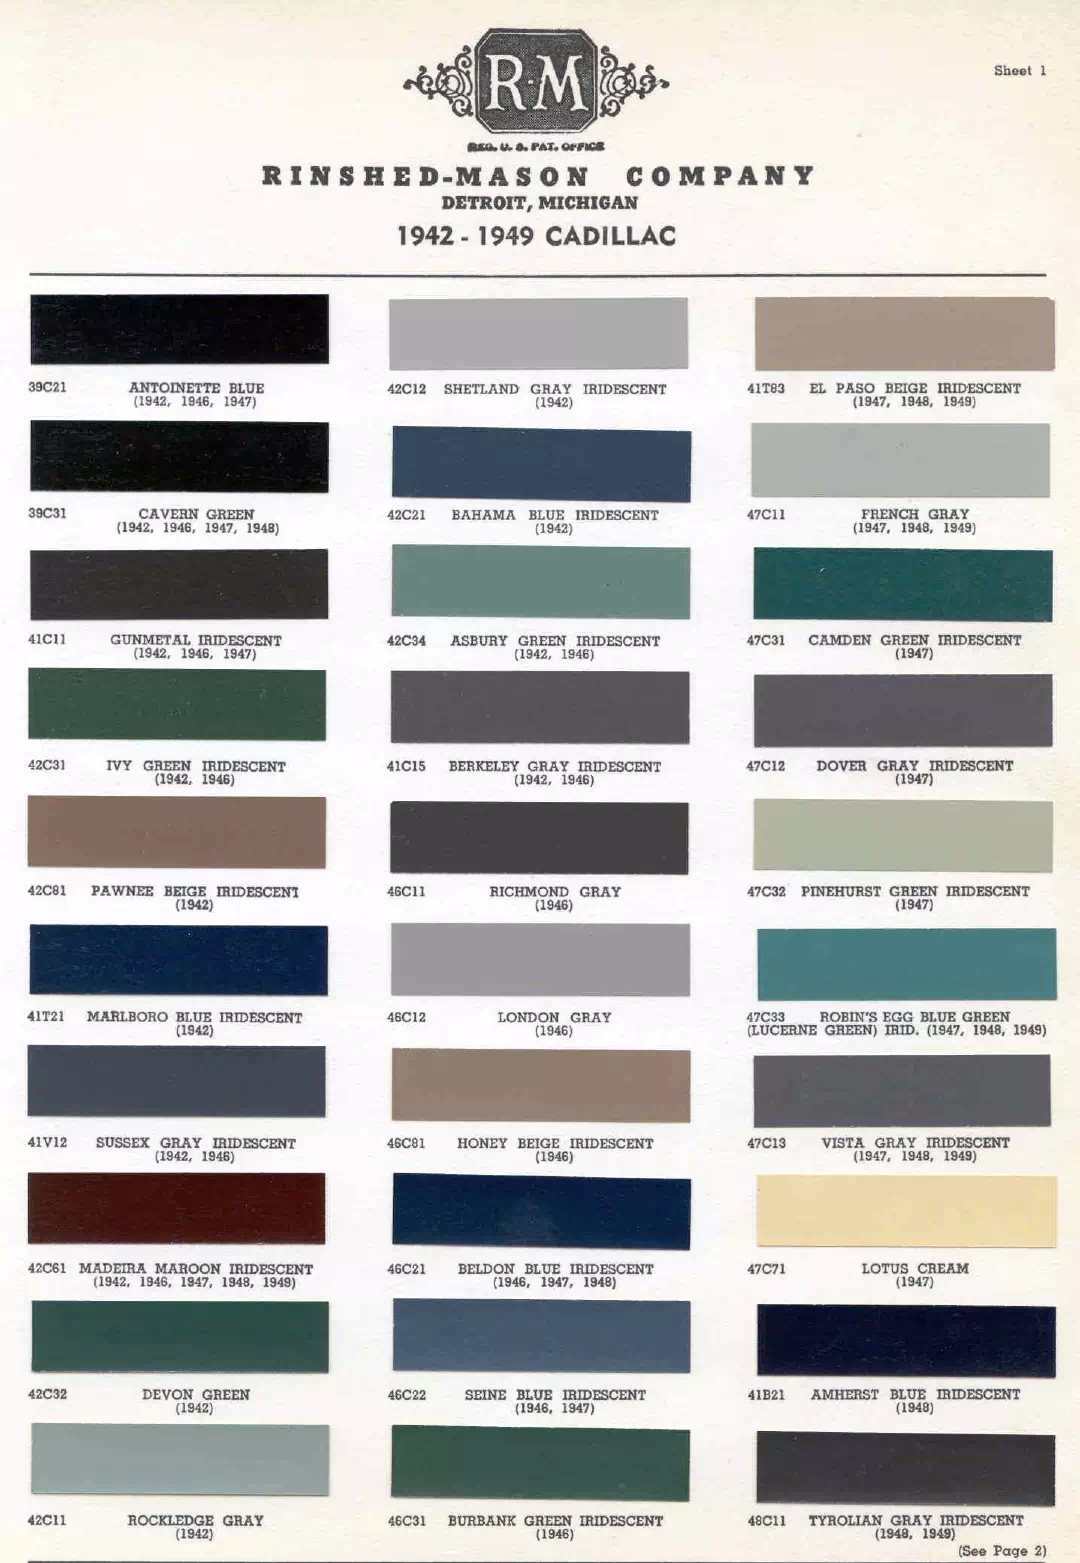 colors and ordering codes for those colors used the vehicles for the years listed